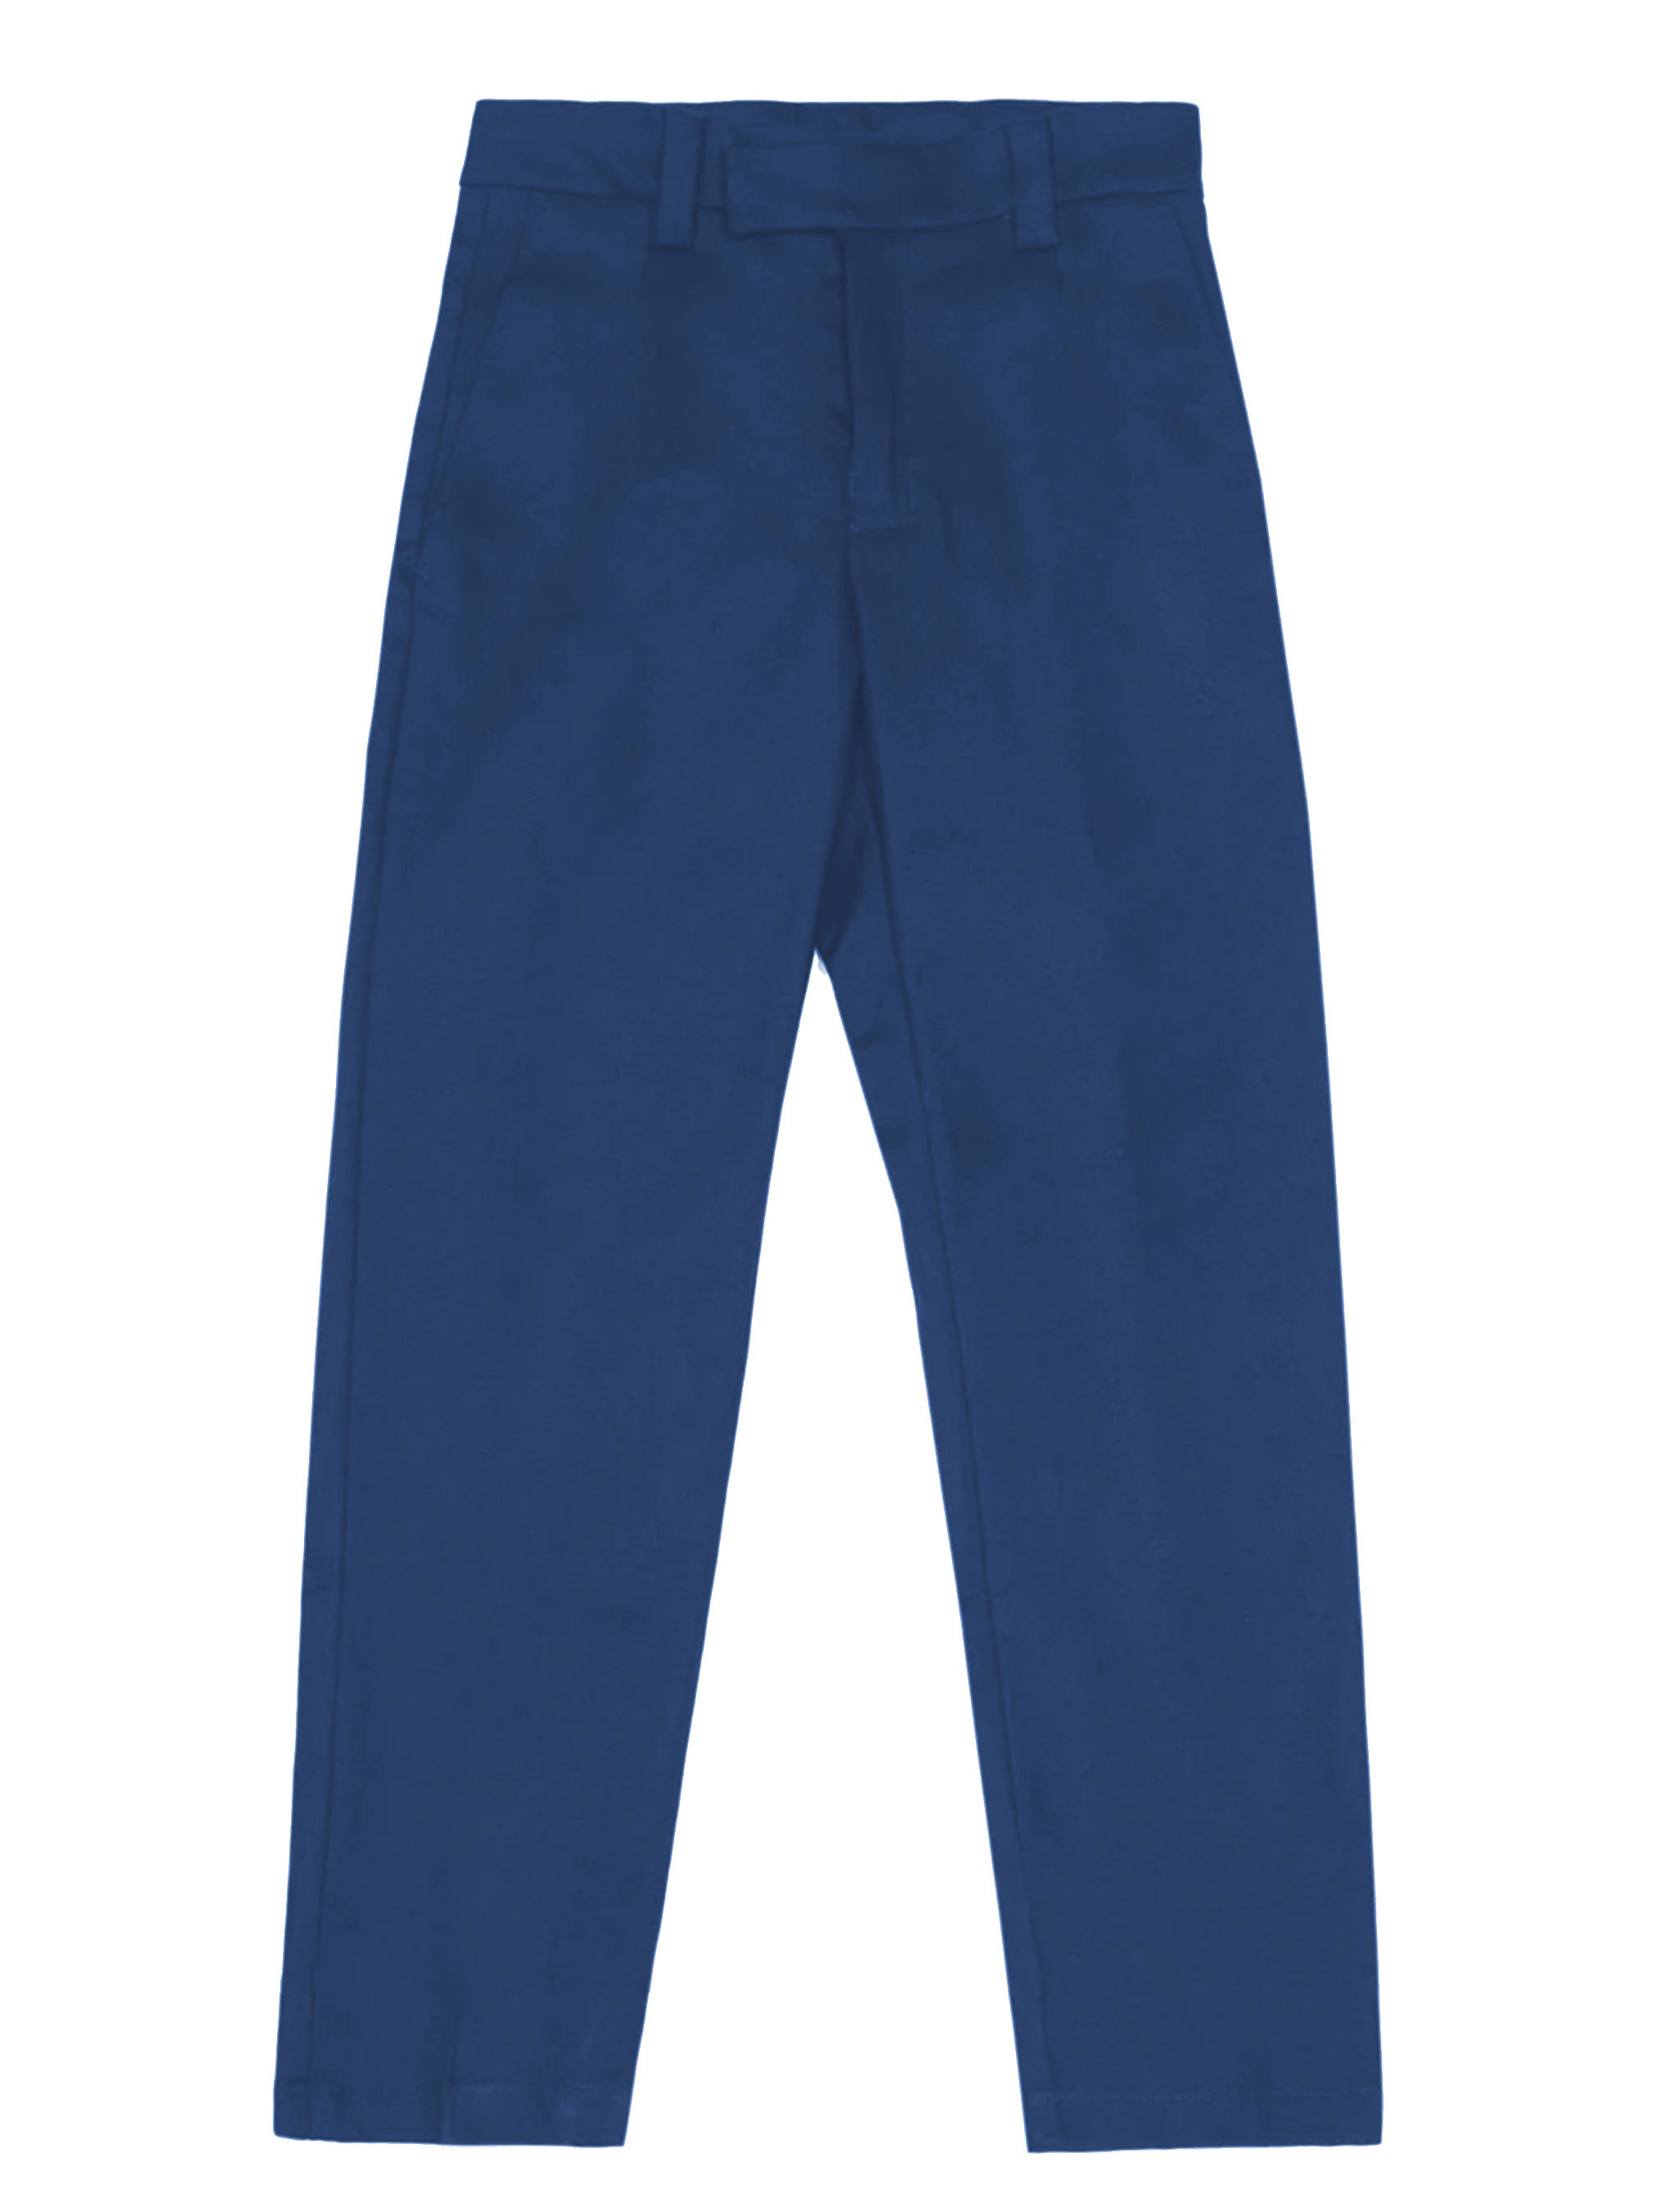 Florala Relaxed Fit Double Knee Pants - Dickies US